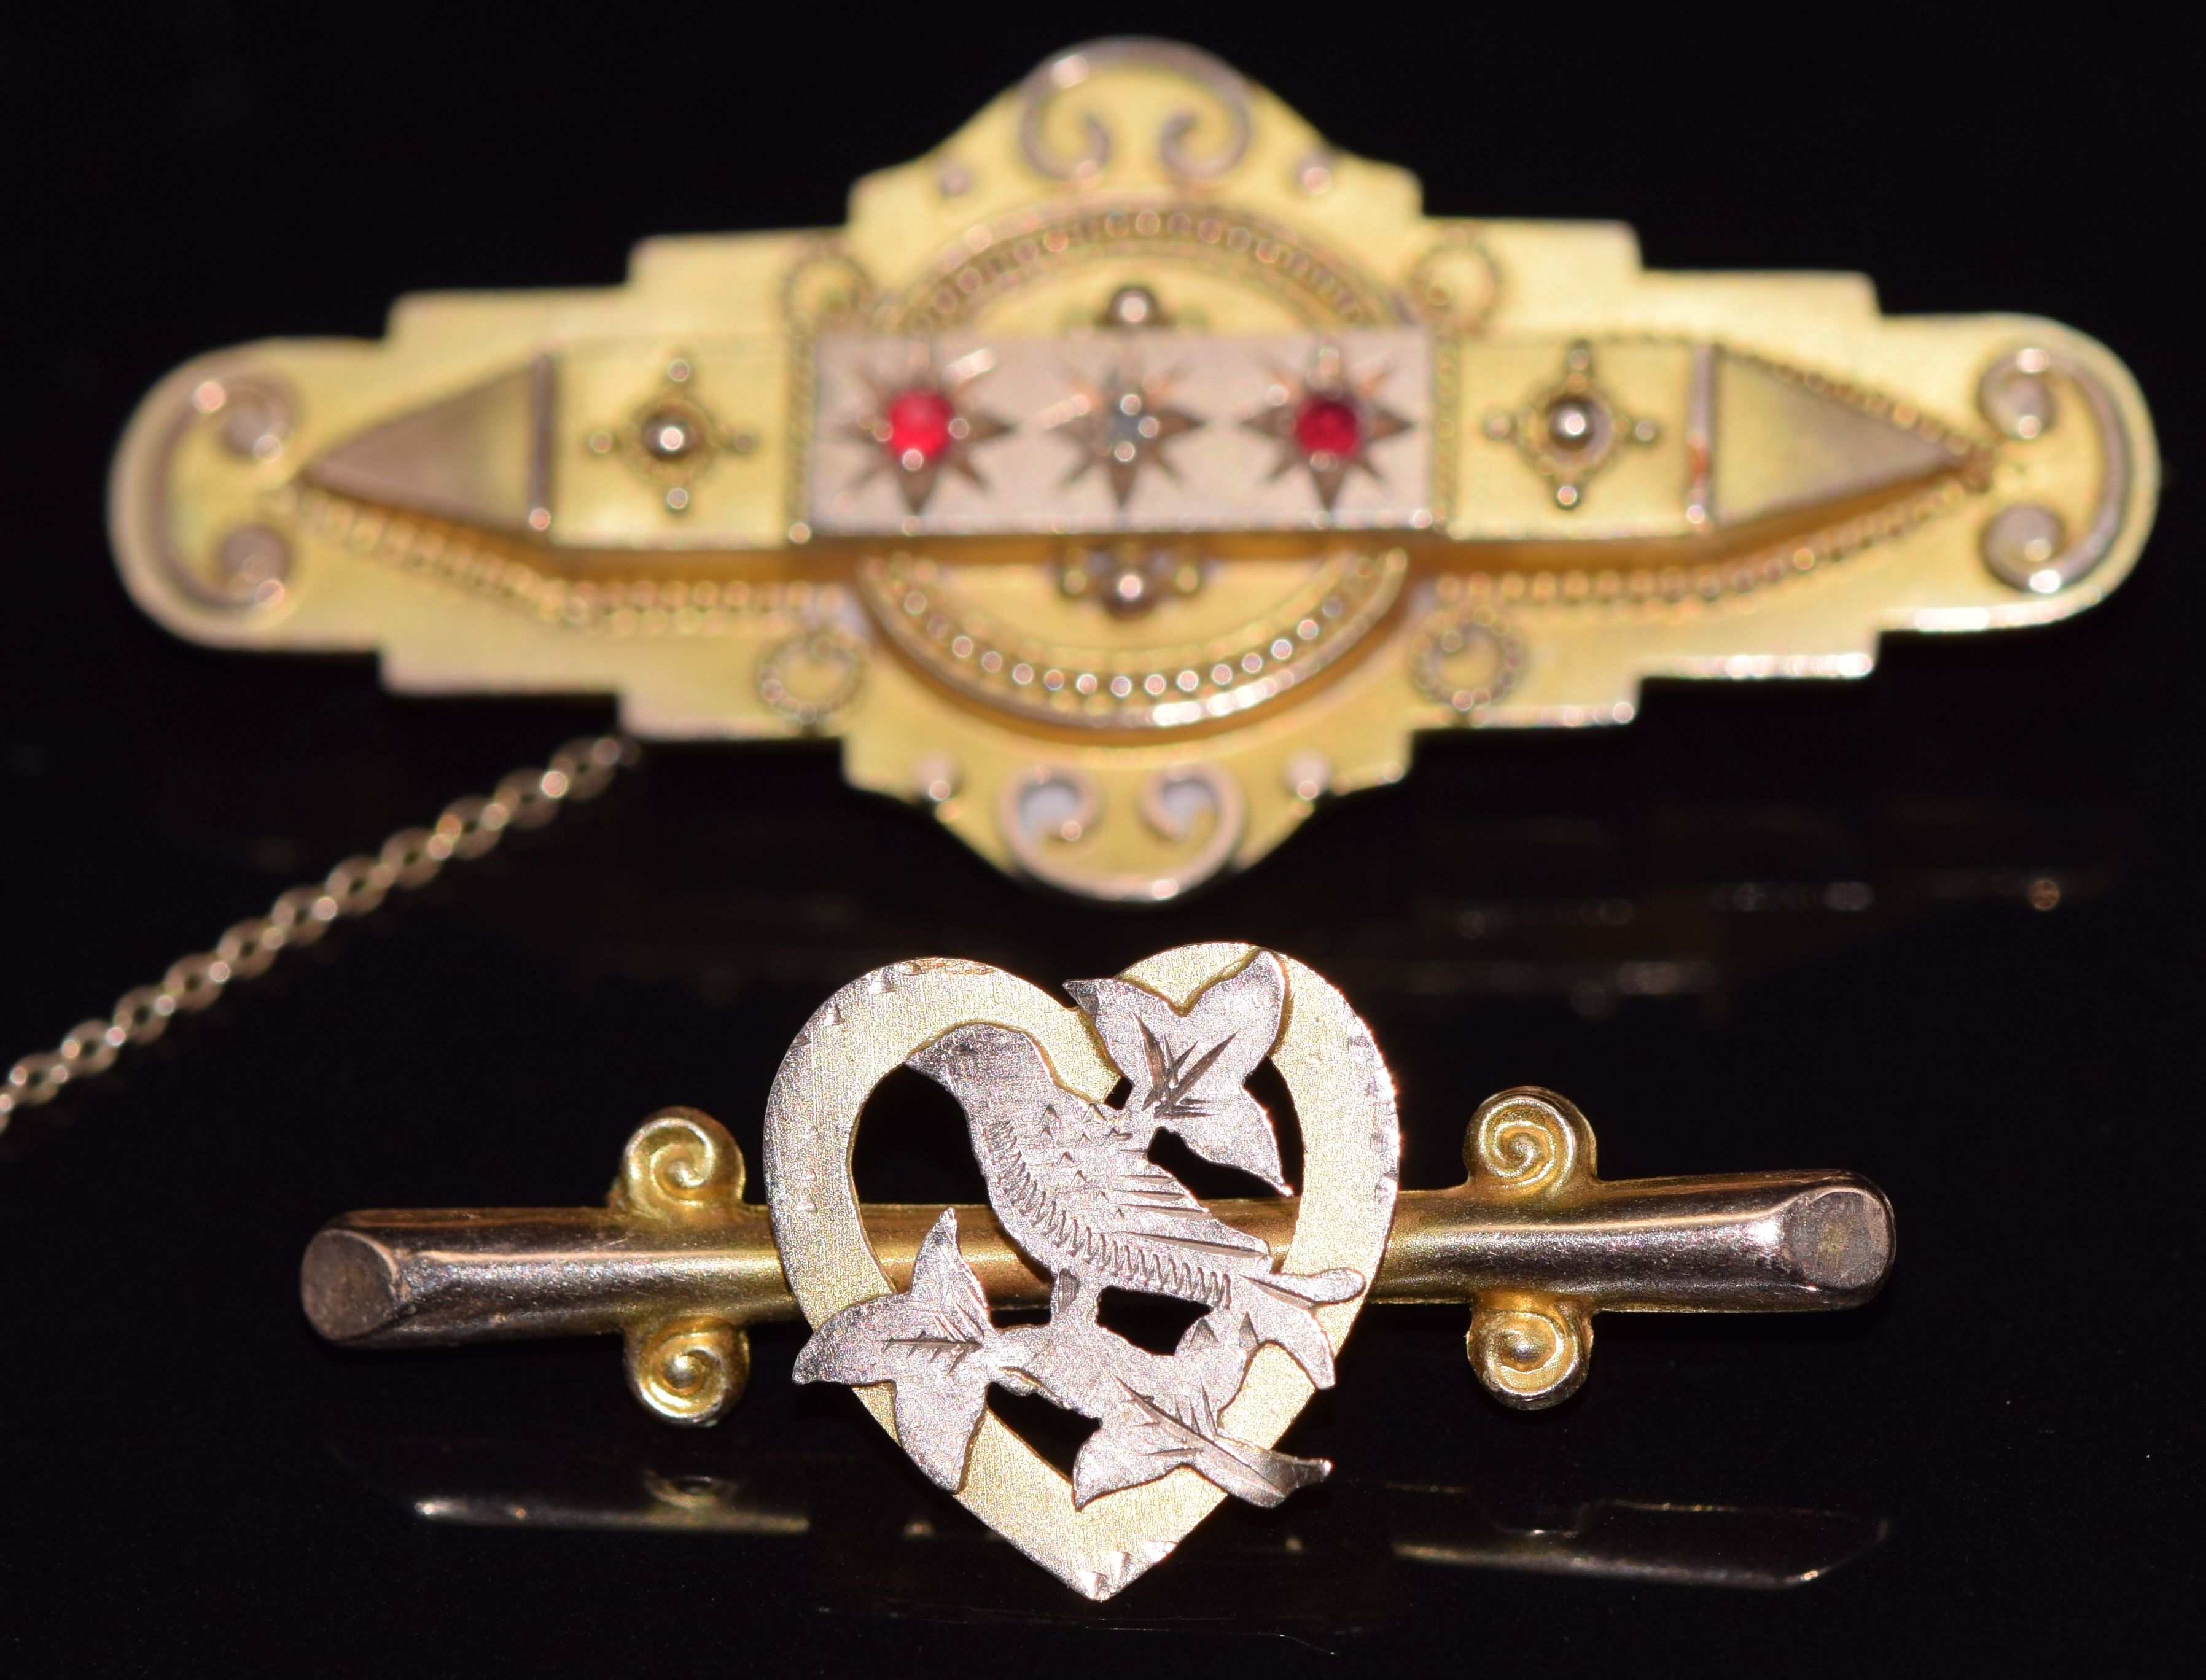 Edwardian 9ct gold brooch in the form of a heart and swallow and a 9ct gold brooch set with a